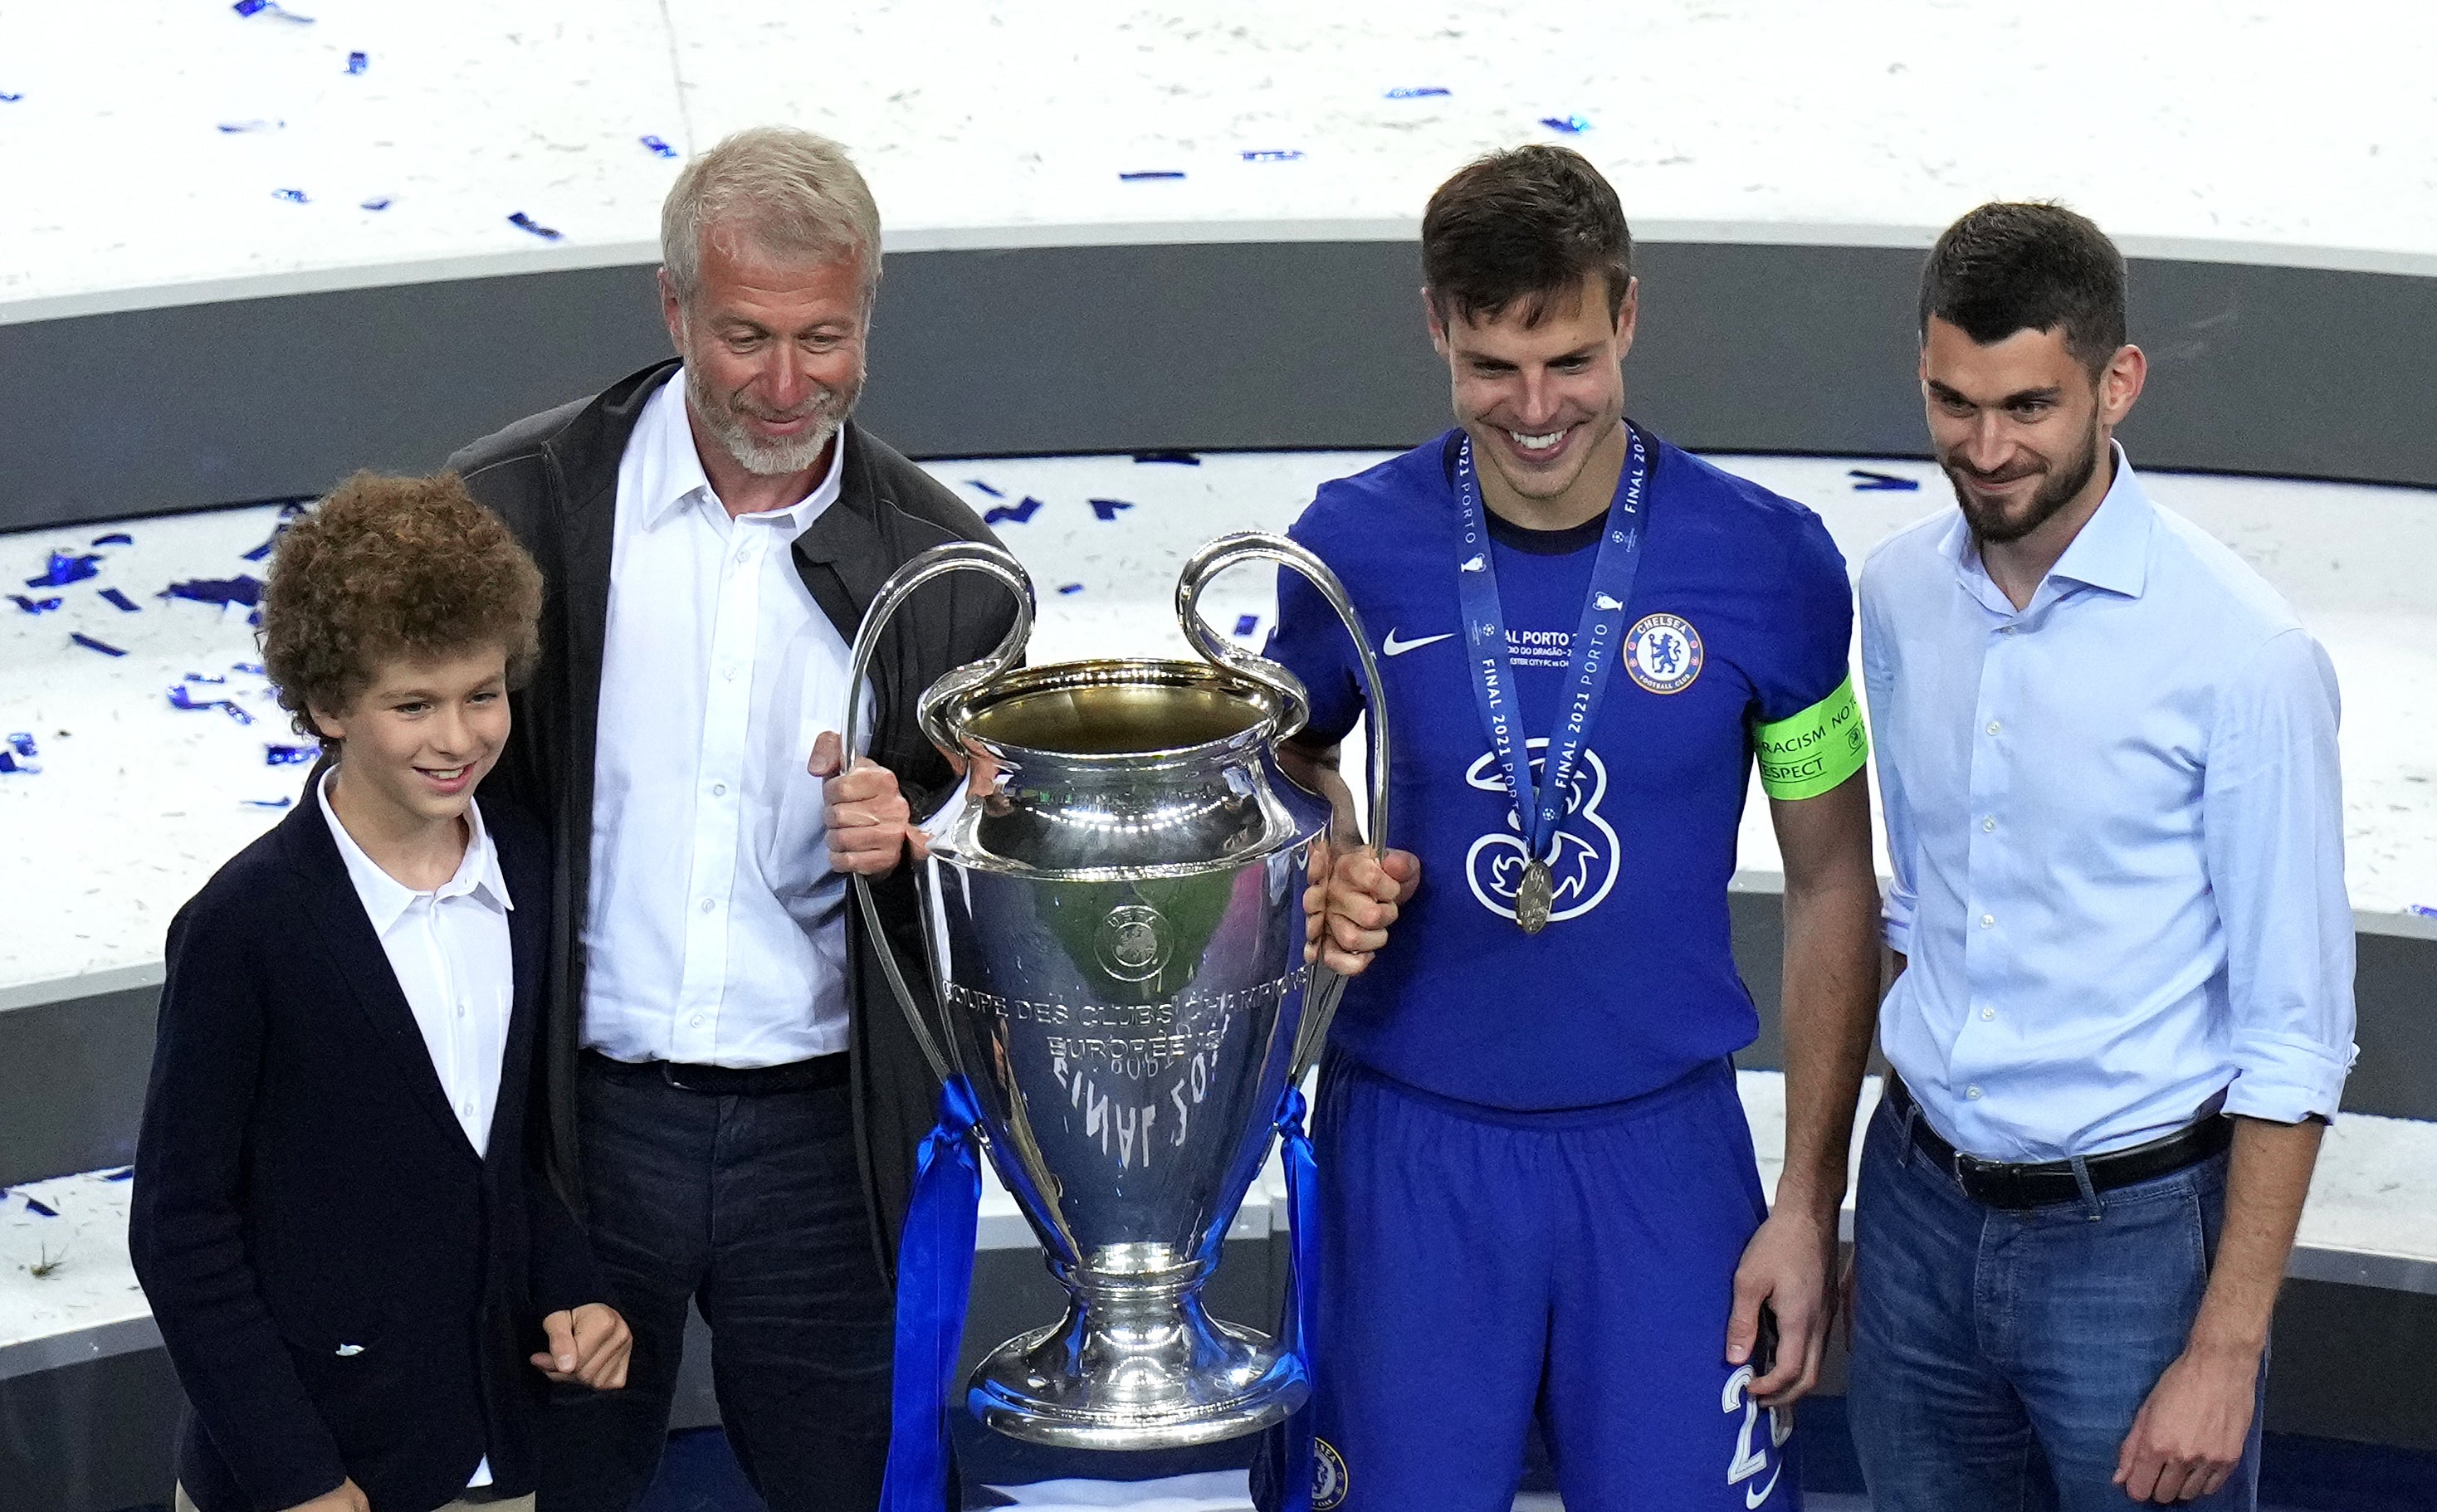 Roman Abramovich, second left, with Cesar Azpilicueta, second right, and the Champions League trophy